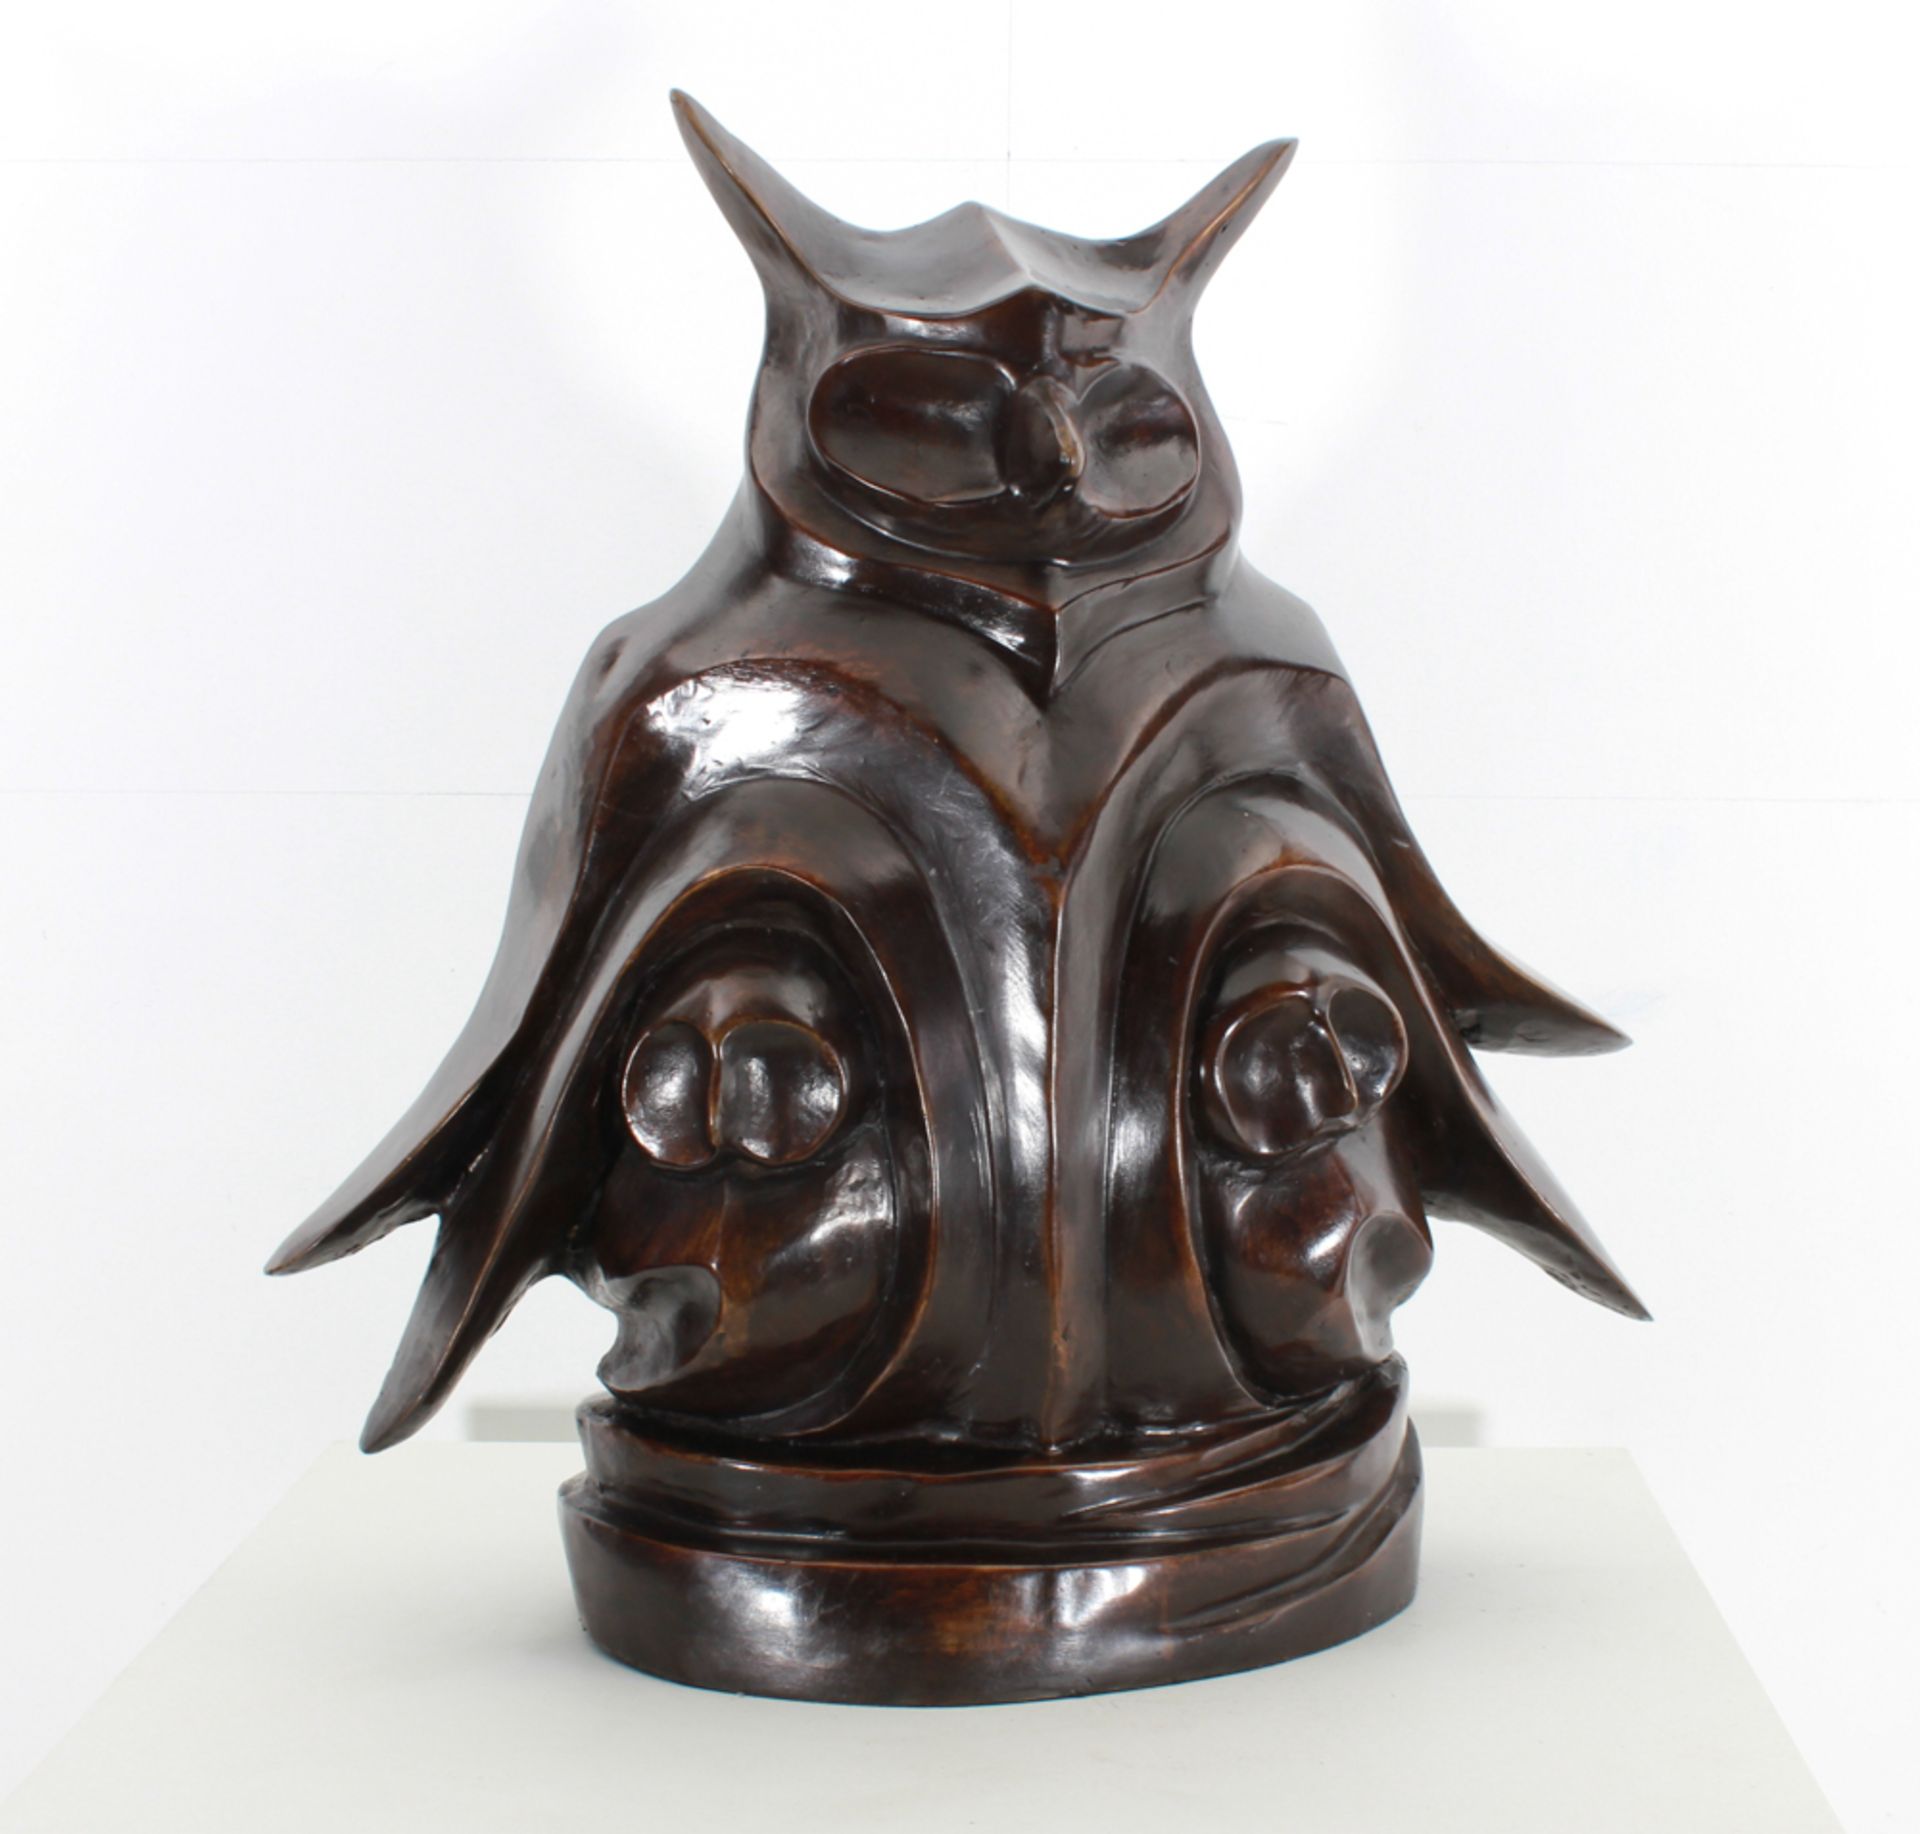 Bronze Bronze alloy sculpture after a design by the Amsterdam School, ** Owl **. - size height and